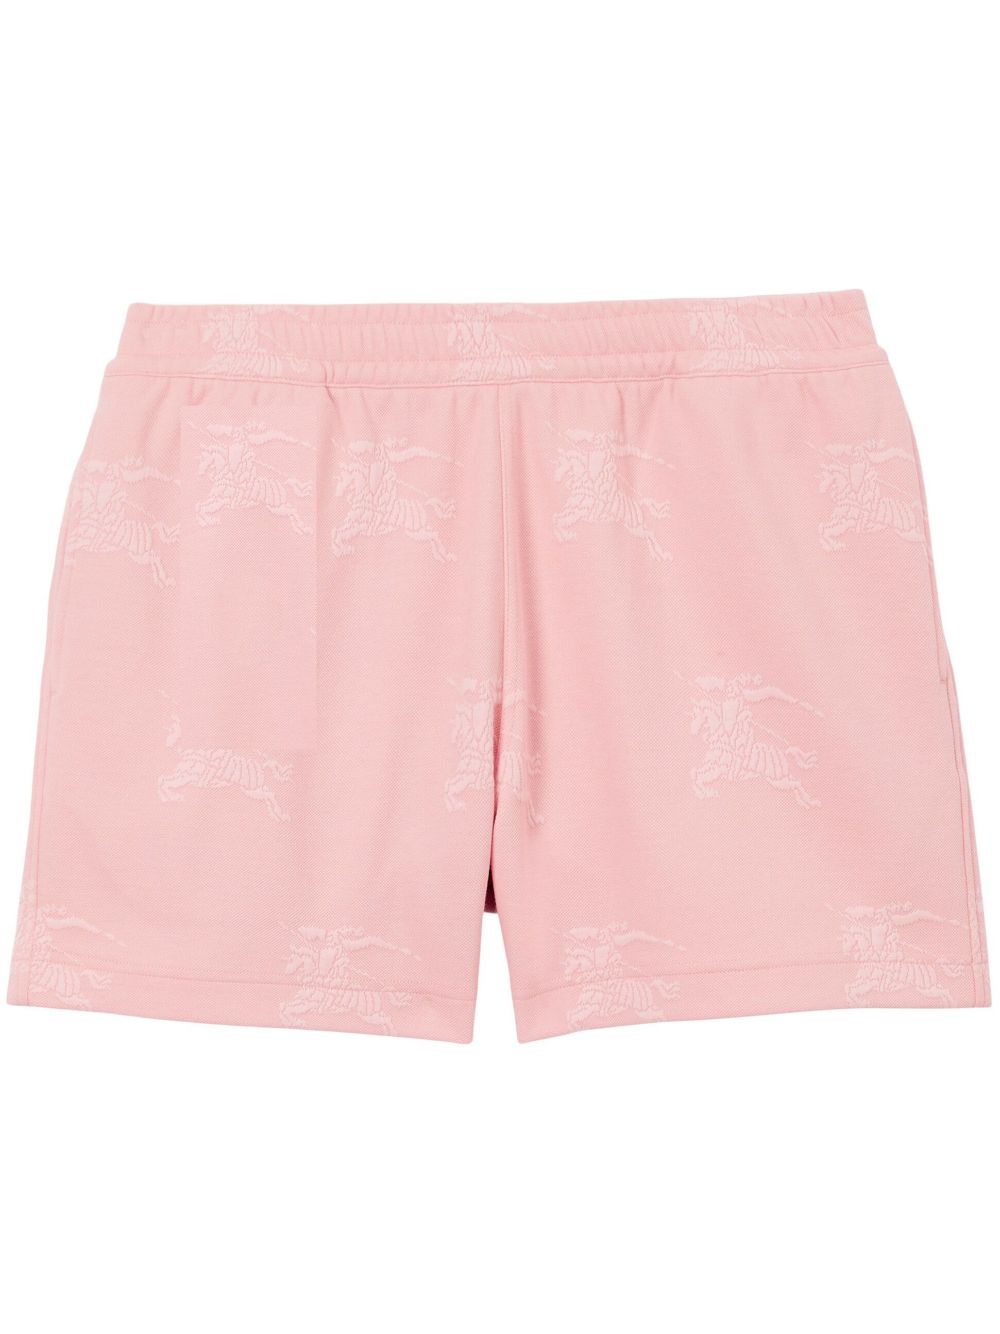 BURBERRY EQUESTRIAN KNIGHT ABOVE-KNEE LENGTH SHORTS